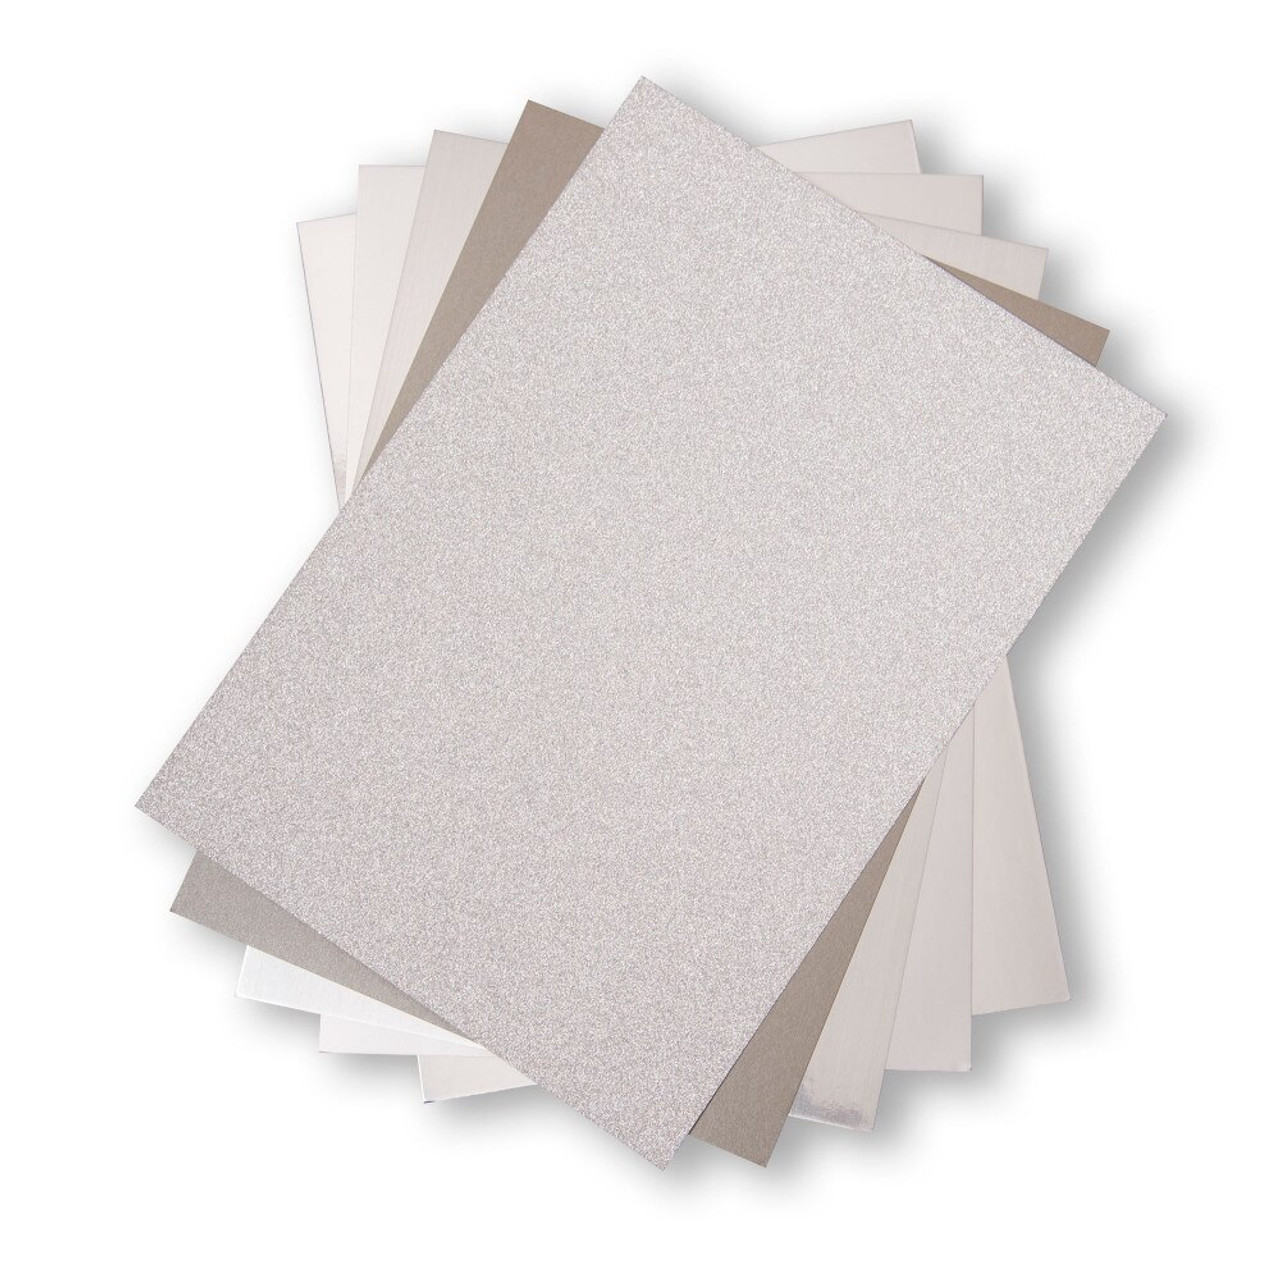 Sizzix Surfacez, The Opulent Cardstock 50 Sheets Pack - Silver -  Scrapbooking Made Simple